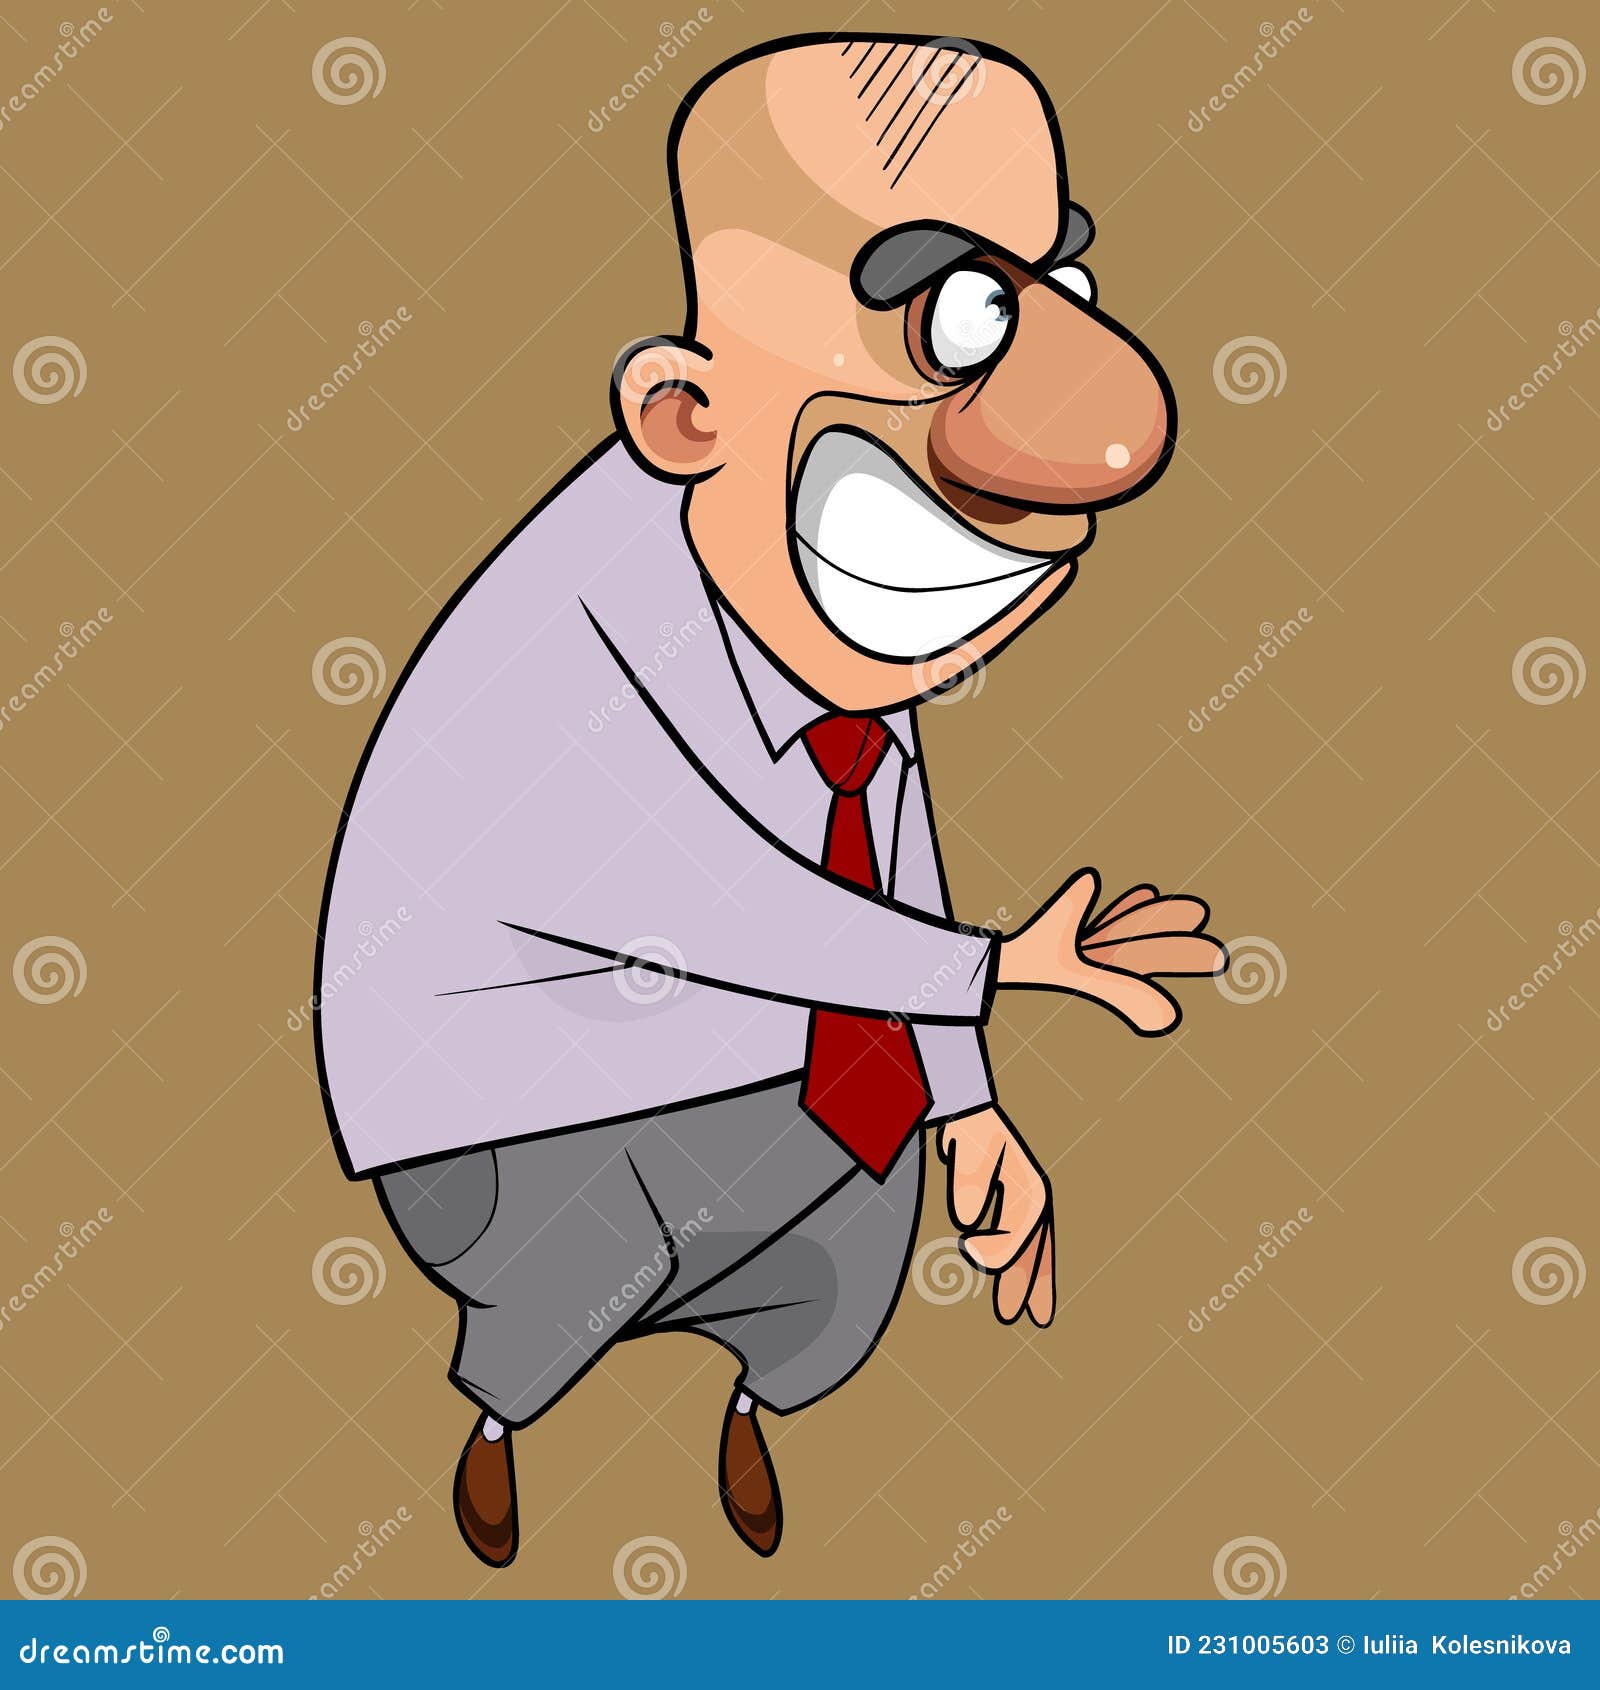 Cartoon Smiling Man Holding Out His Hand Begging Gesture Stock Vector -  Illustration of business, joke: 231005603